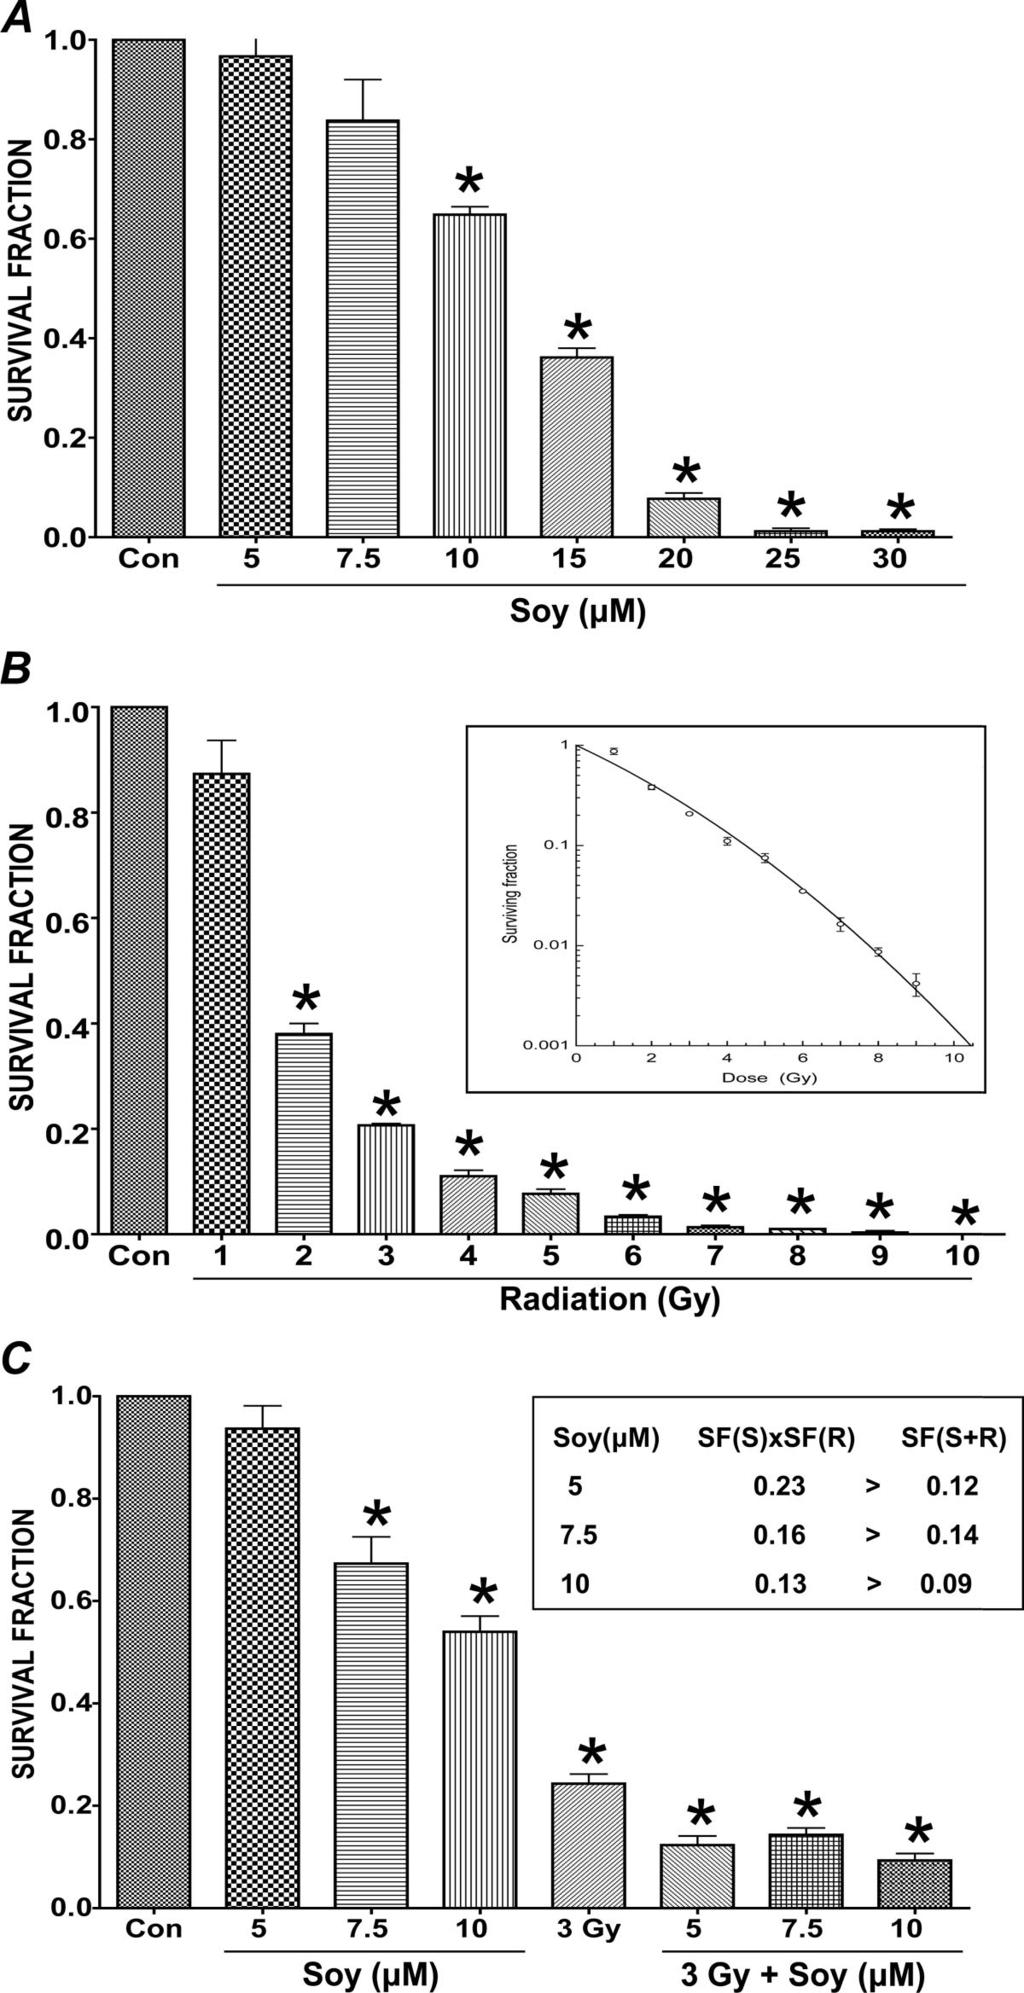 Singh-Gupta et al. Journal of Thoracic Oncology Volume 6, Number 4, April 2011 FIGURE 2. Survival fraction of A549 cells treated with soy and/or radiation. A, Survival of cells treated with soy.